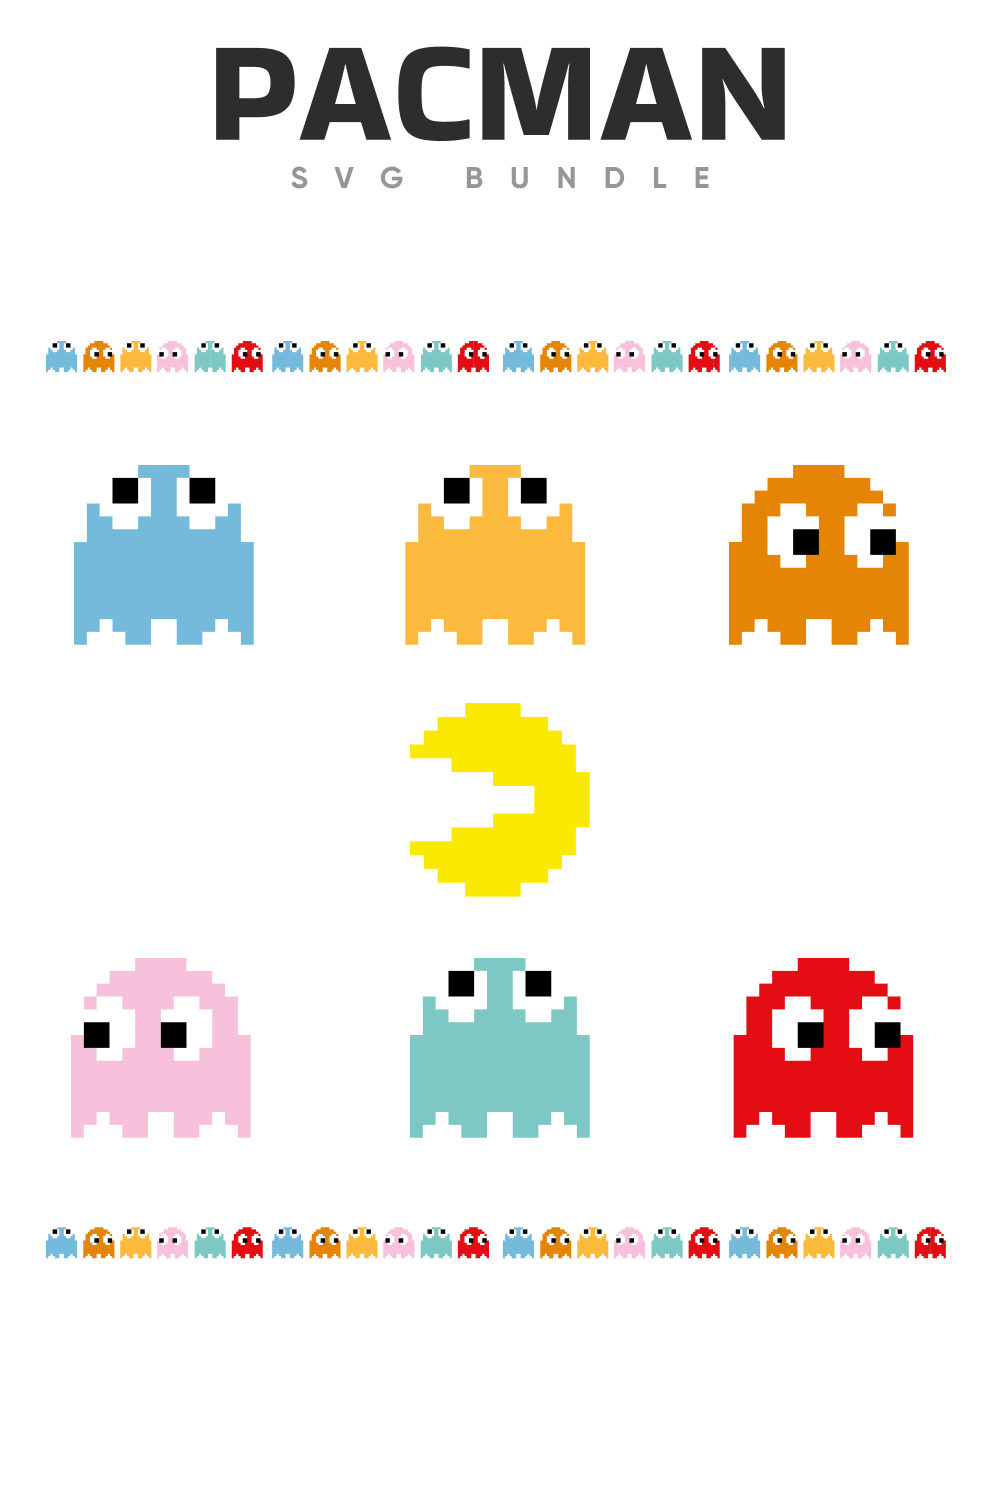 Classic Pacman characters.